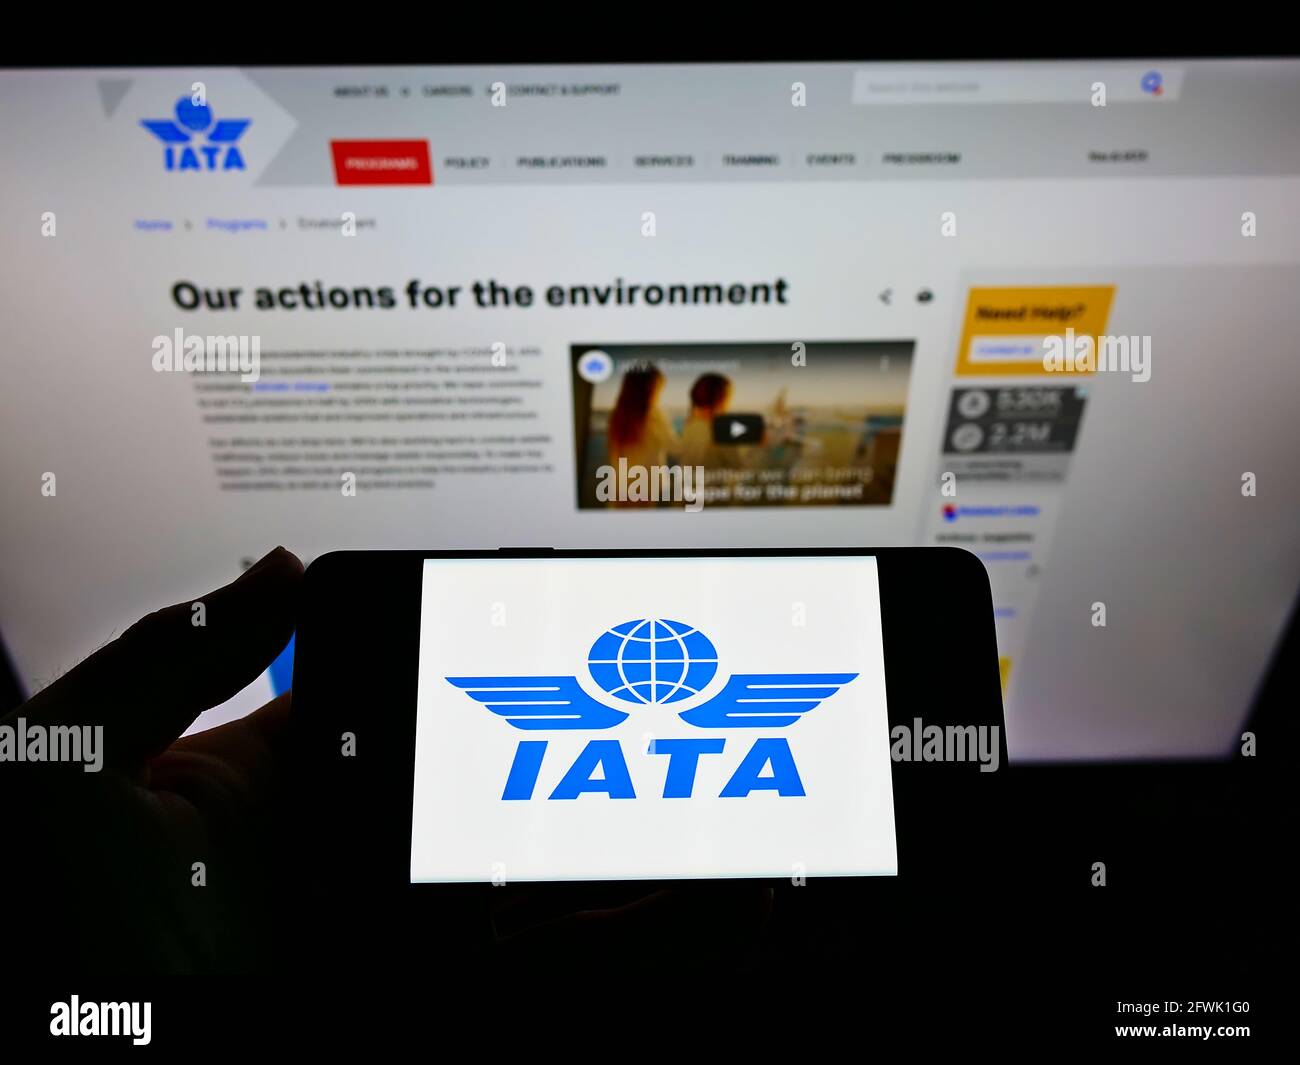 Person holding cellphone with logo of International Air Transport Association (IATA) on screen in front of web page. Focus on phone display. Stock Photo